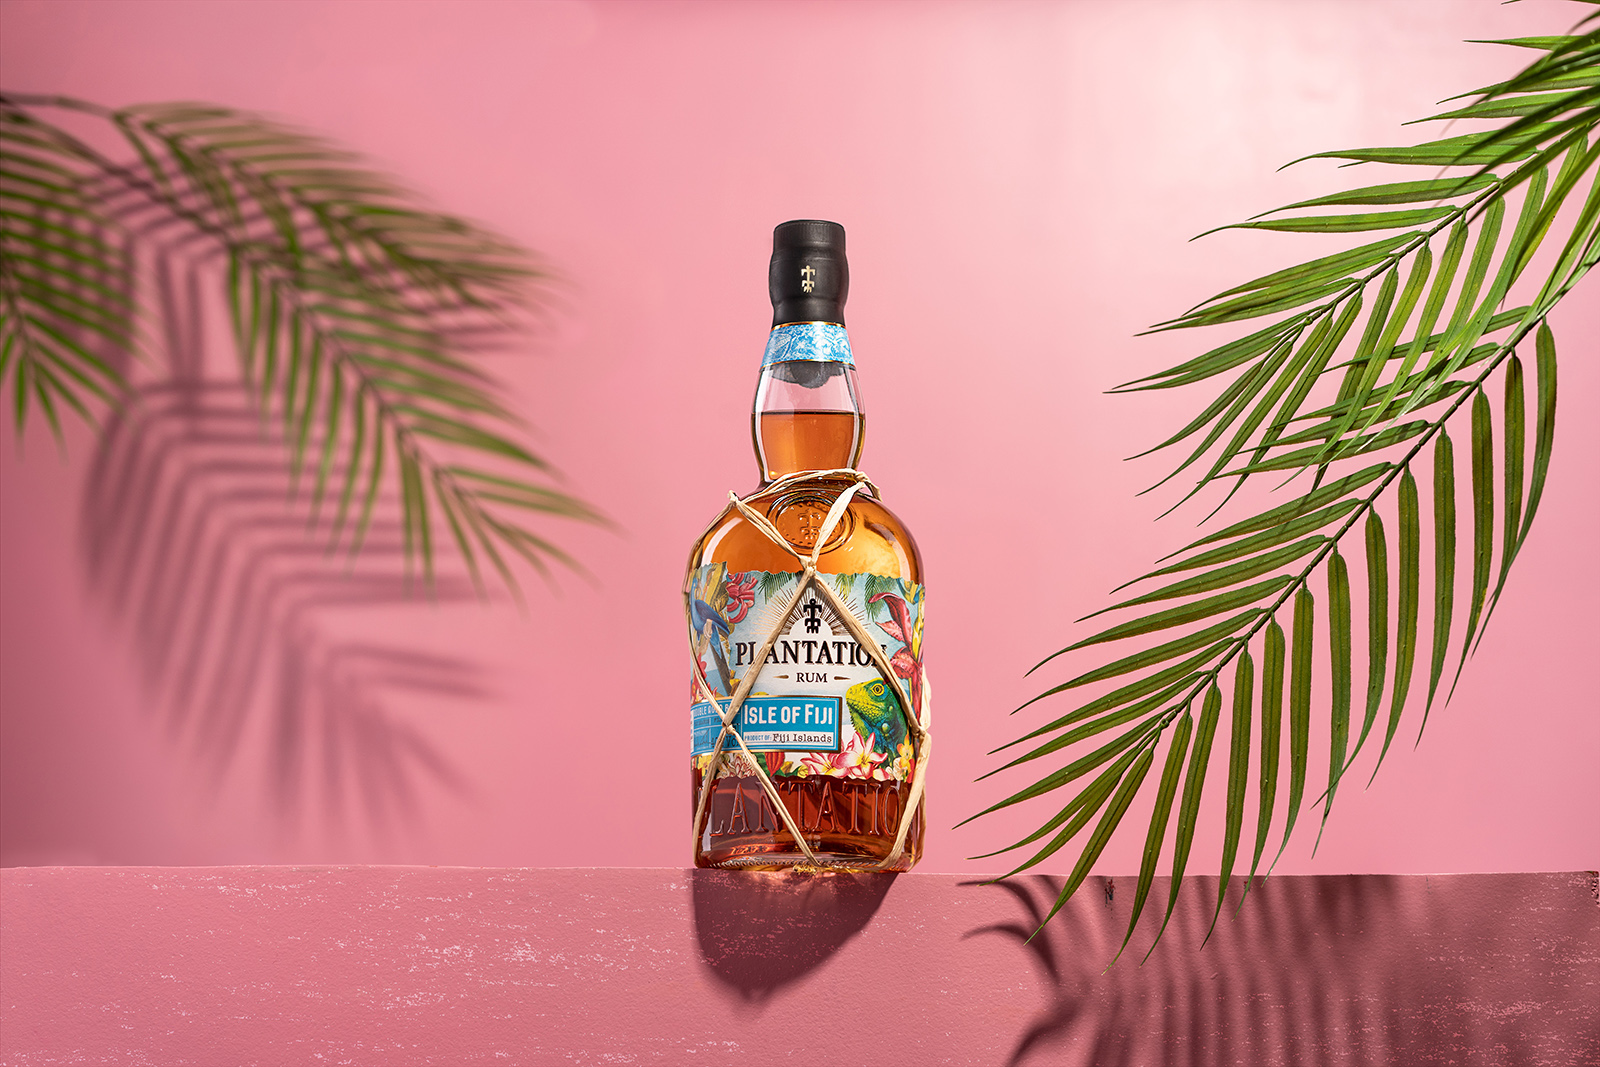 Packaging Design for Plantation Rum Isle of Fiji “Capturing The Beauty Of The Fiji Islands In An Inviting Exotic Packaging”